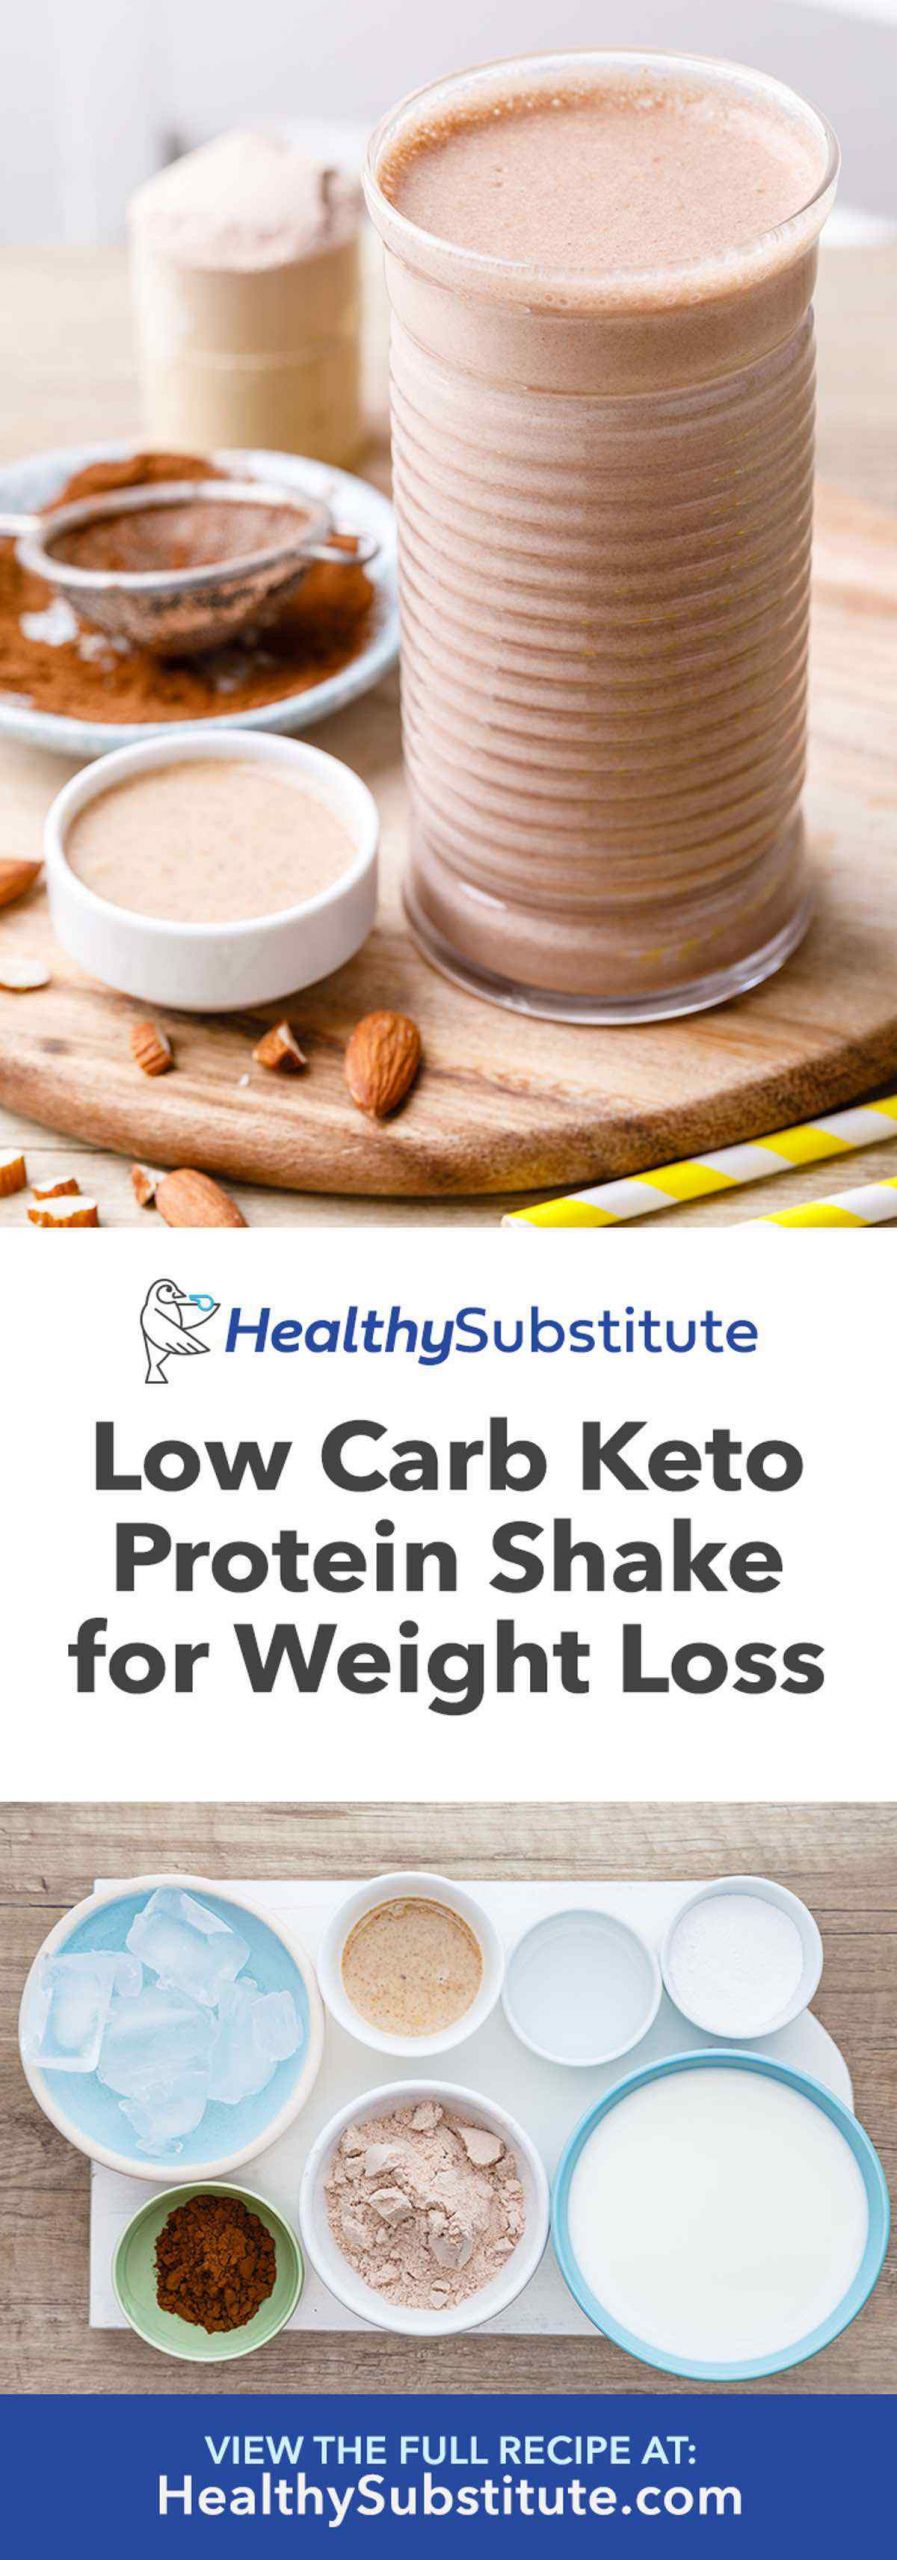 Low Carb Protein Shake Recipes For Weight Loss
 Low Carb Keto Protein Shake for Weight Loss Healthy